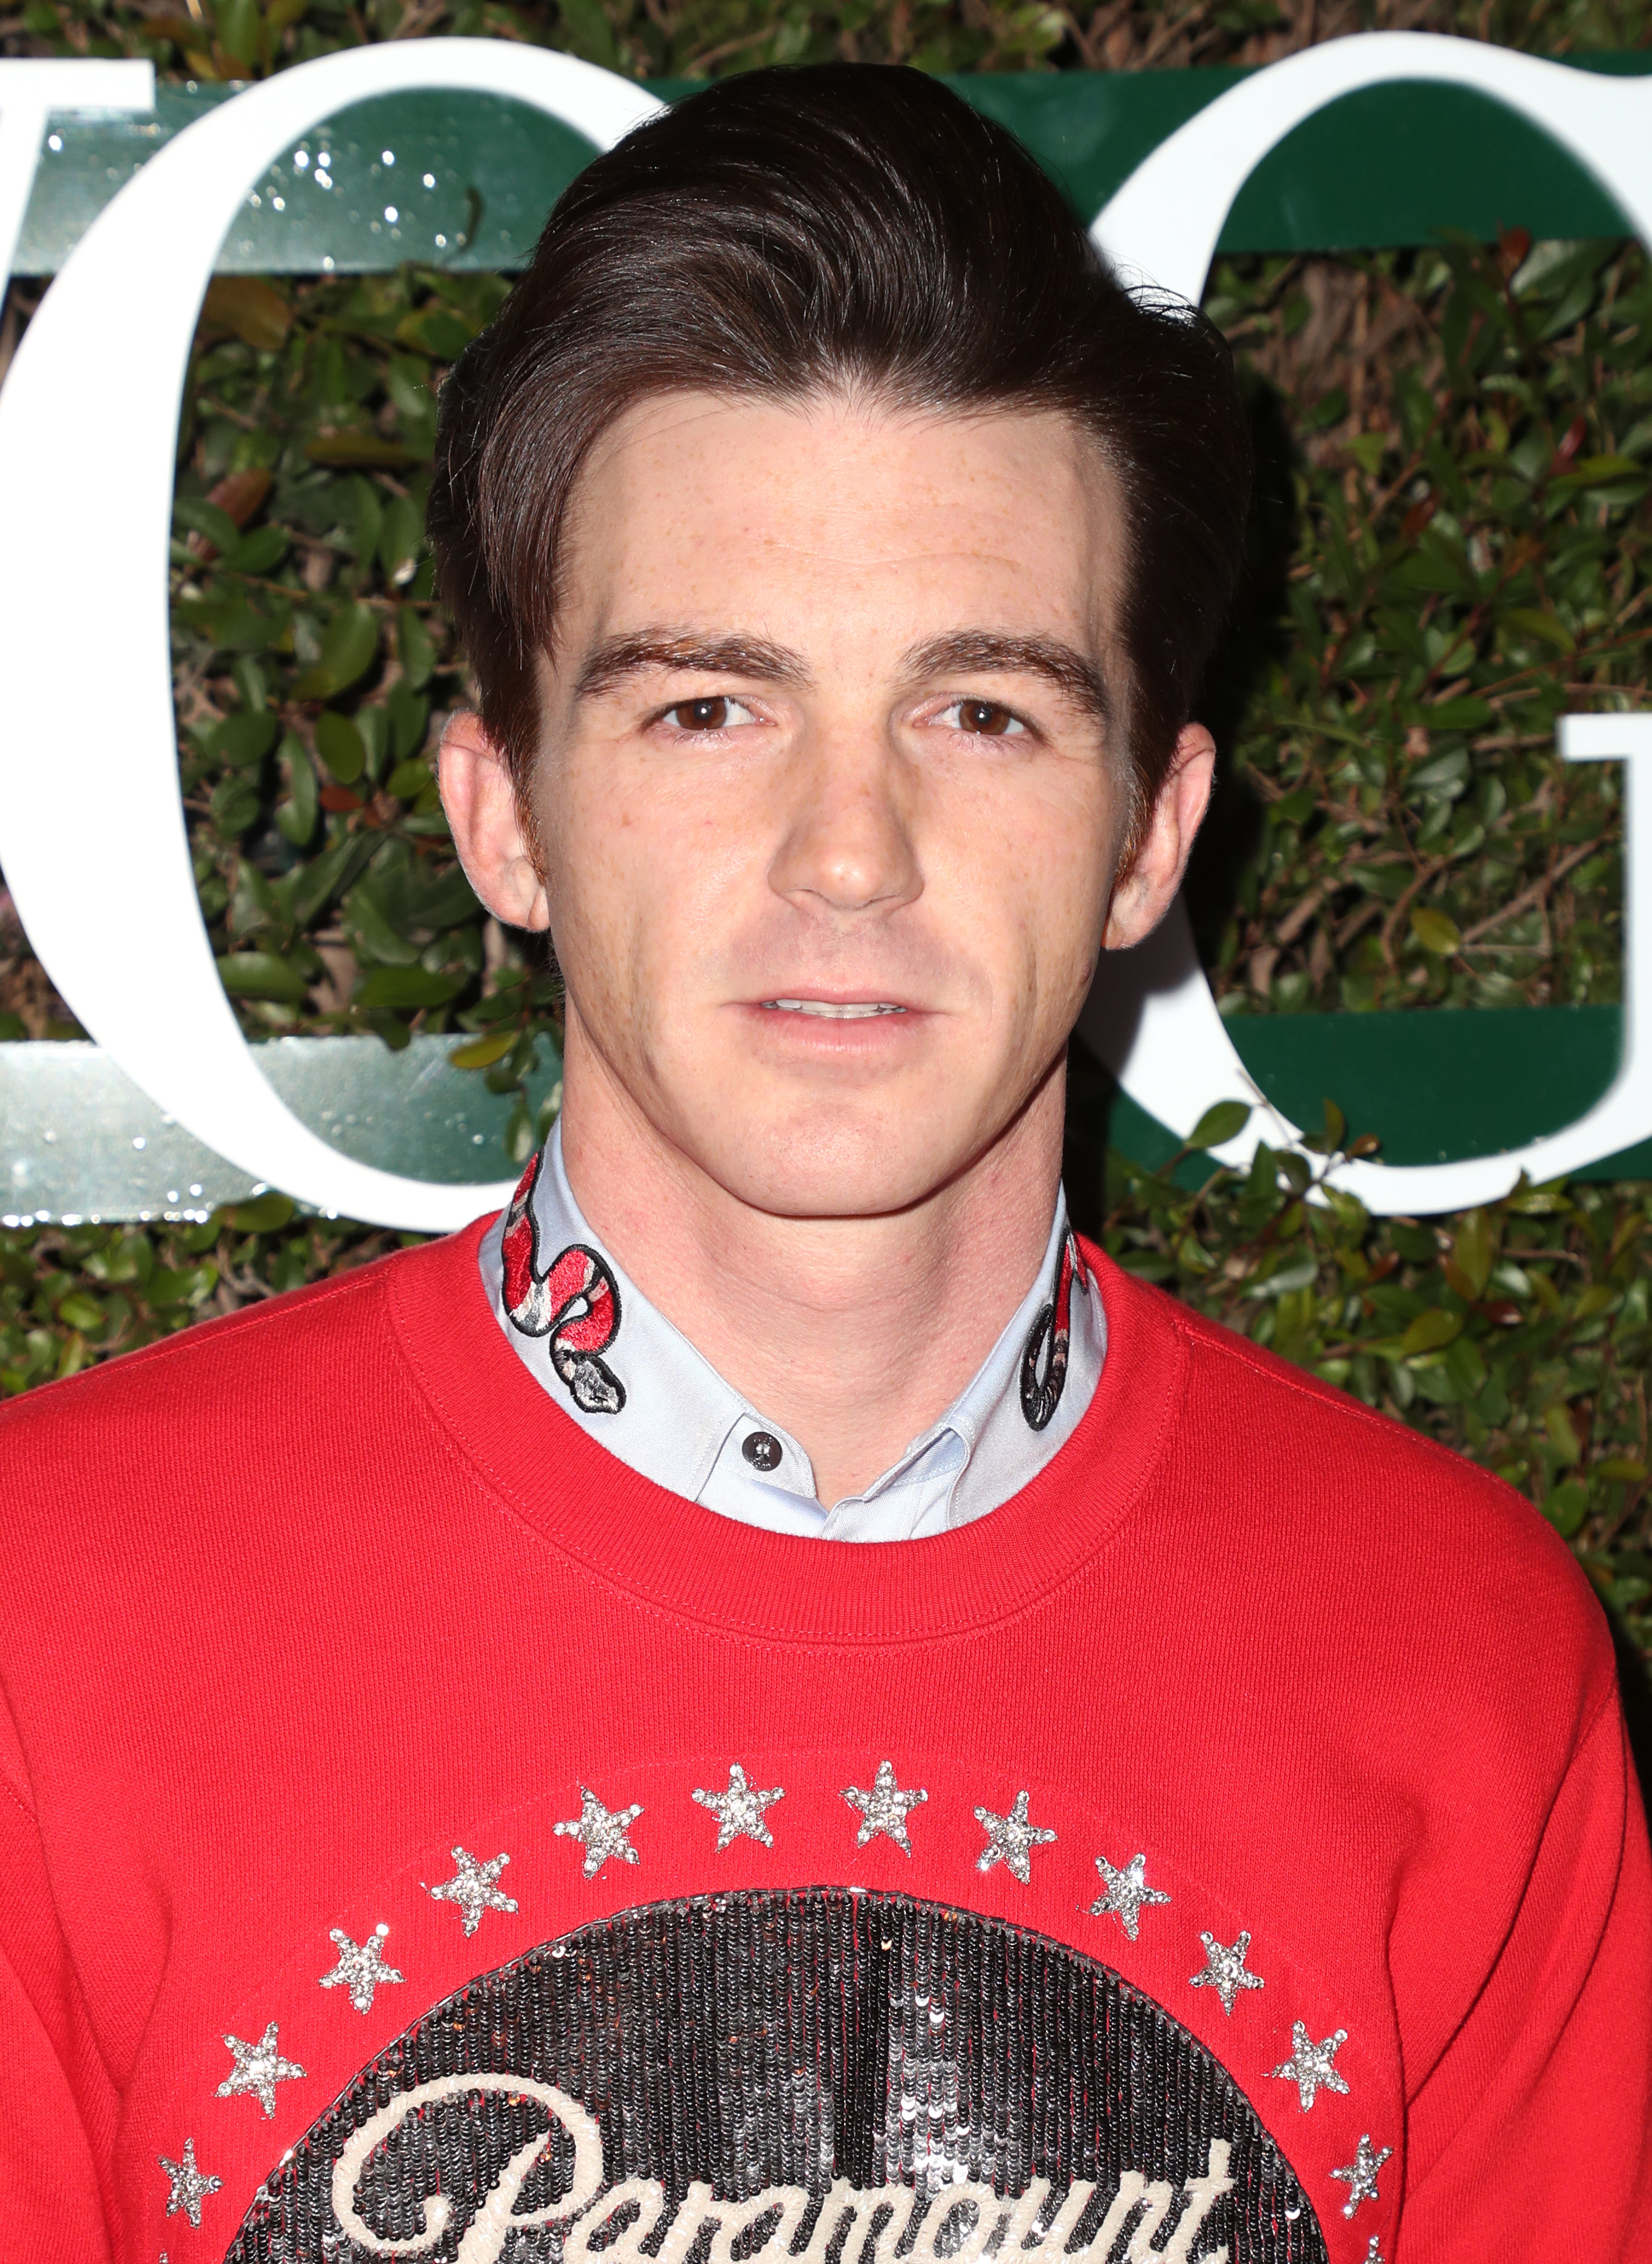 Drake Bell wearing a red sweater with Paramount logo, posing in front of a hedge backdrop